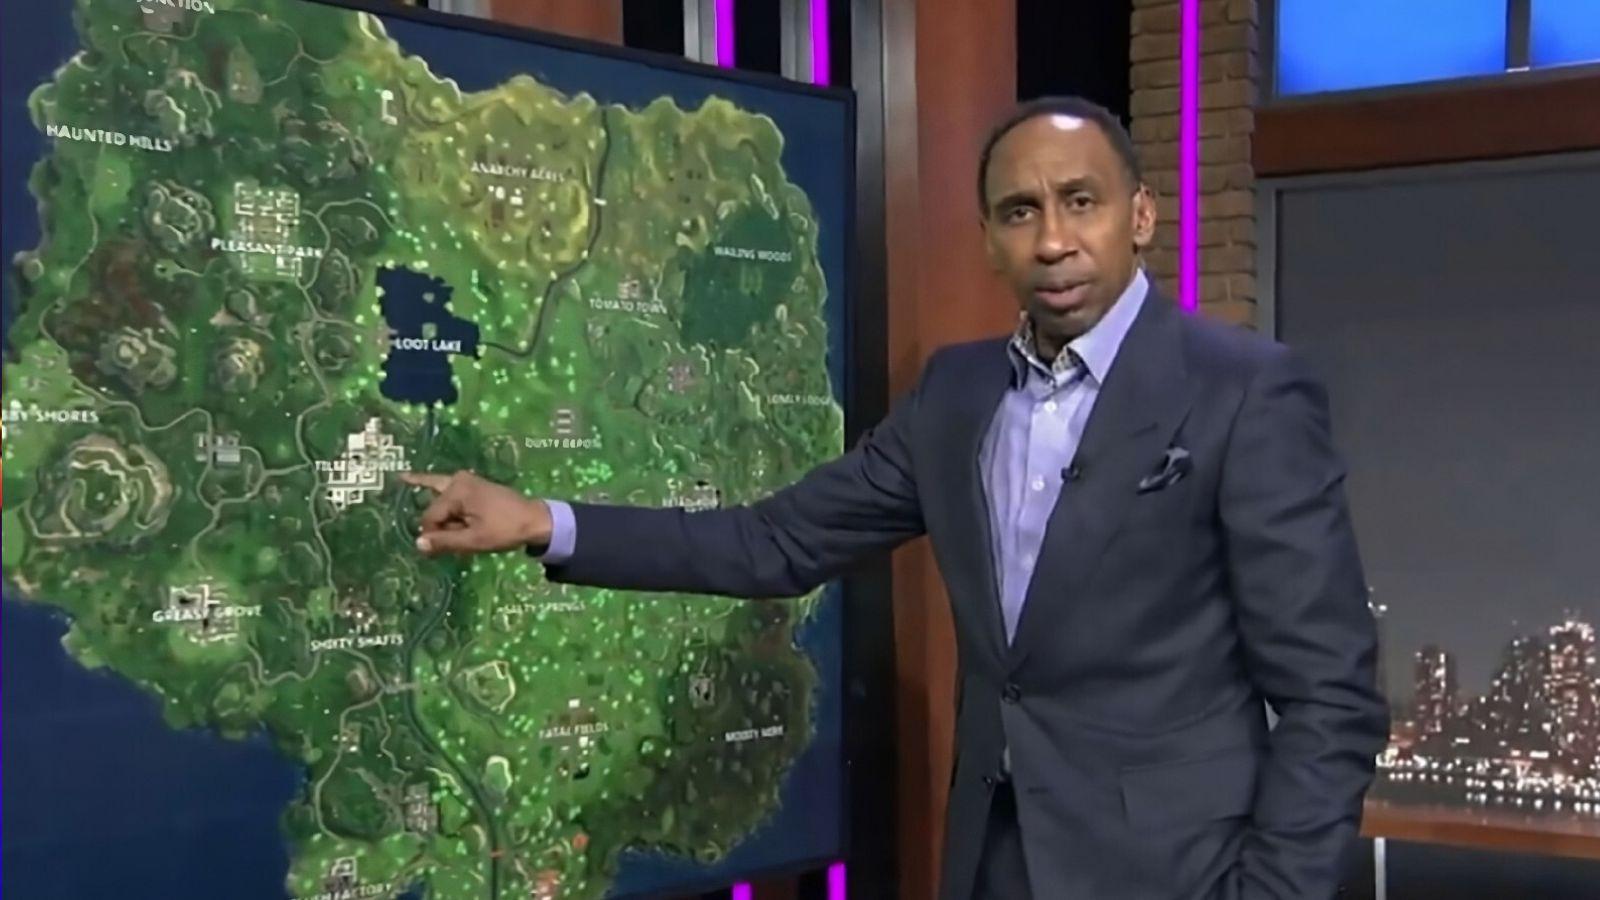 Stephen A. Smith analyzing the Fortnite map on his eponymous show.